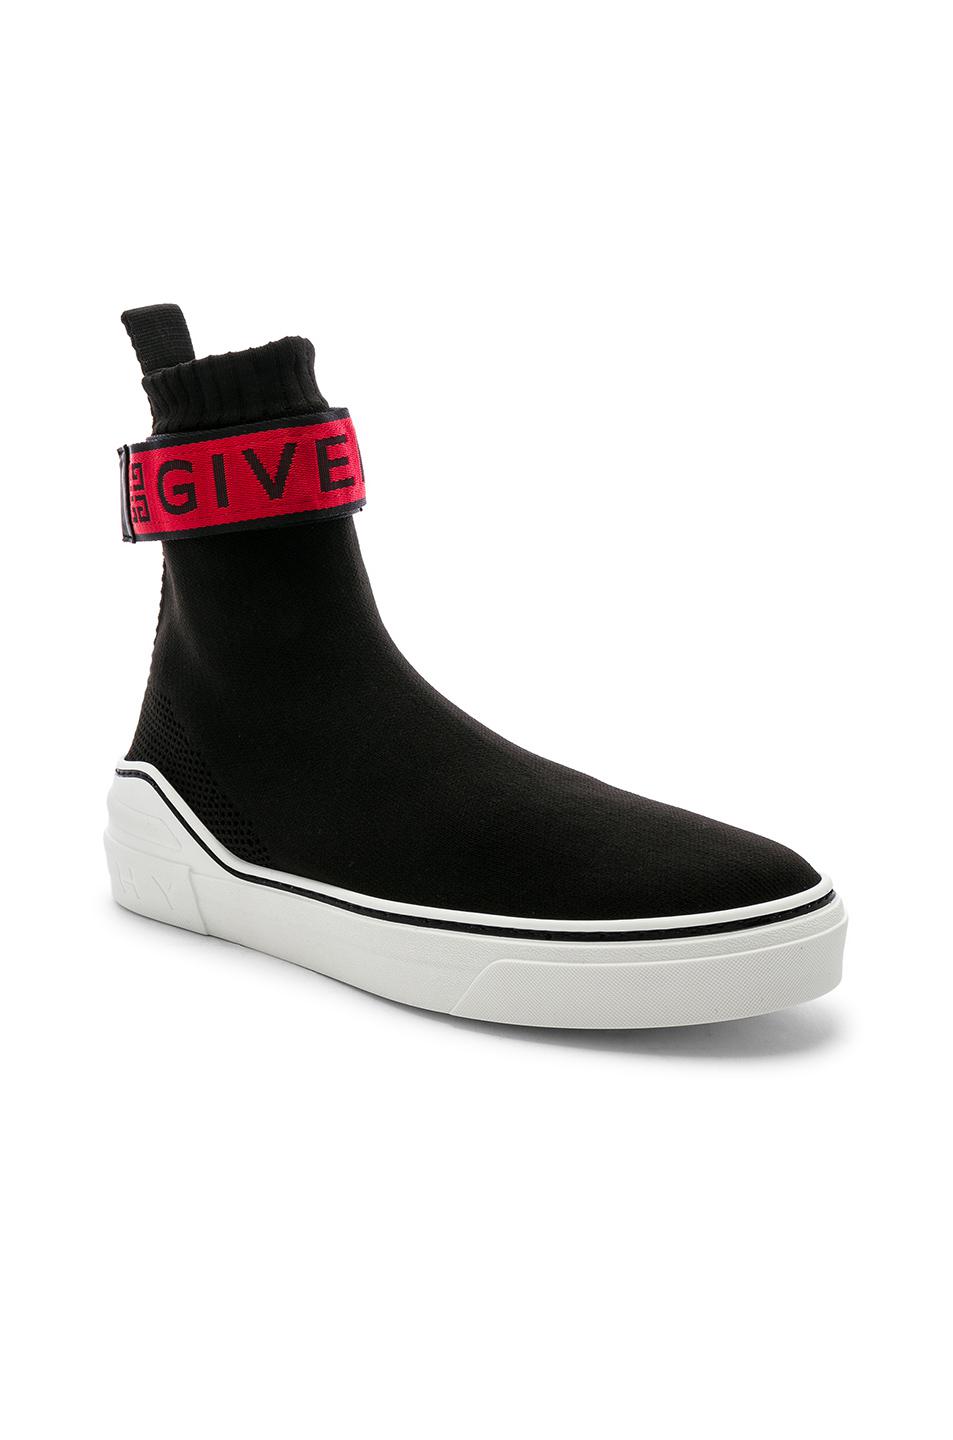 Givenchy Leather George V Sock Sneakers in Black & Red (Black) for Men ...